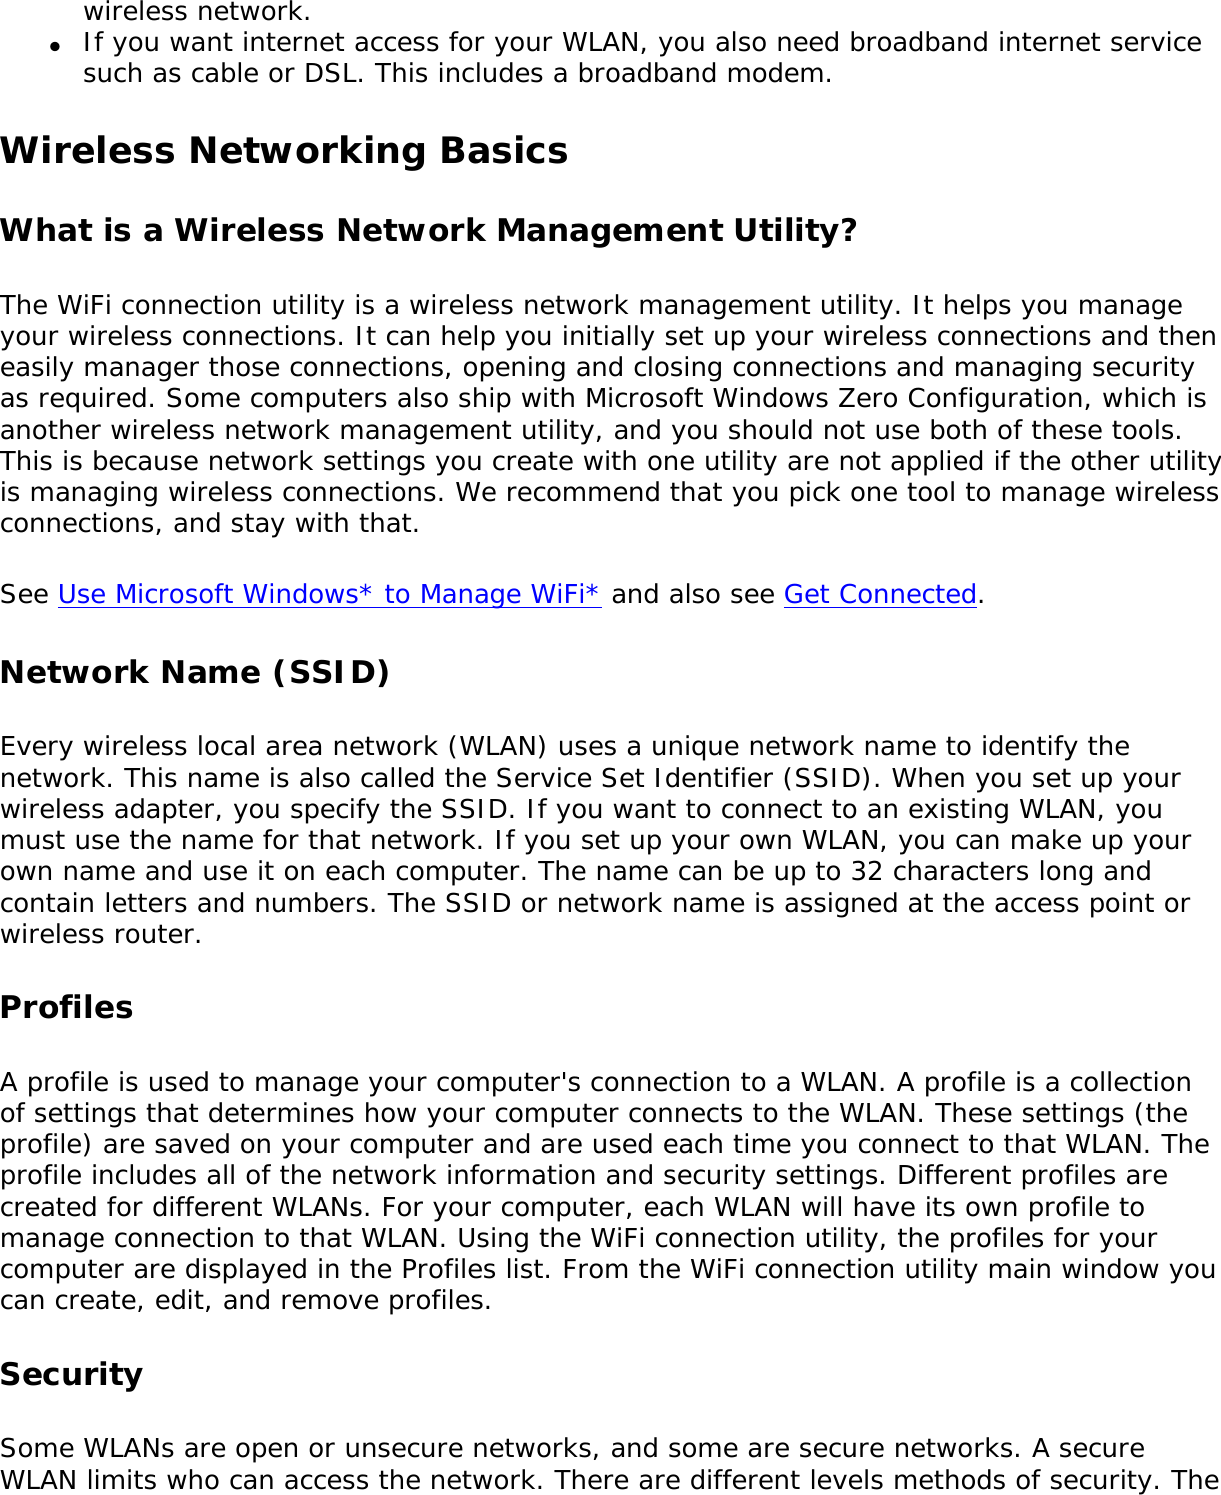 wireless network.●     If you want internet access for your WLAN, you also need broadband internet service such as cable or DSL. This includes a broadband modem.Wireless Networking Basics What is a Wireless Network Management Utility?The WiFi connection utility is a wireless network management utility. It helps you manage your wireless connections. It can help you initially set up your wireless connections and then easily manager those connections, opening and closing connections and managing security as required. Some computers also ship with Microsoft Windows Zero Configuration, which is another wireless network management utility, and you should not use both of these tools. This is because network settings you create with one utility are not applied if the other utility is managing wireless connections. We recommend that you pick one tool to manage wireless connections, and stay with that. See Use Microsoft Windows* to Manage WiFi* and also see Get Connected.Network Name (SSID) Every wireless local area network (WLAN) uses a unique network name to identify the network. This name is also called the Service Set Identifier (SSID). When you set up your wireless adapter, you specify the SSID. If you want to connect to an existing WLAN, you must use the name for that network. If you set up your own WLAN, you can make up your own name and use it on each computer. The name can be up to 32 characters long and contain letters and numbers. The SSID or network name is assigned at the access point or wireless router. ProfilesA profile is used to manage your computer&apos;s connection to a WLAN. A profile is a collection of settings that determines how your computer connects to the WLAN. These settings (the profile) are saved on your computer and are used each time you connect to that WLAN. The profile includes all of the network information and security settings. Different profiles are created for different WLANs. For your computer, each WLAN will have its own profile to manage connection to that WLAN. Using the WiFi connection utility, the profiles for your computer are displayed in the Profiles list. From the WiFi connection utility main window you can create, edit, and remove profiles.SecuritySome WLANs are open or unsecure networks, and some are secure networks. A secure WLAN limits who can access the network. There are different levels methods of security. The 